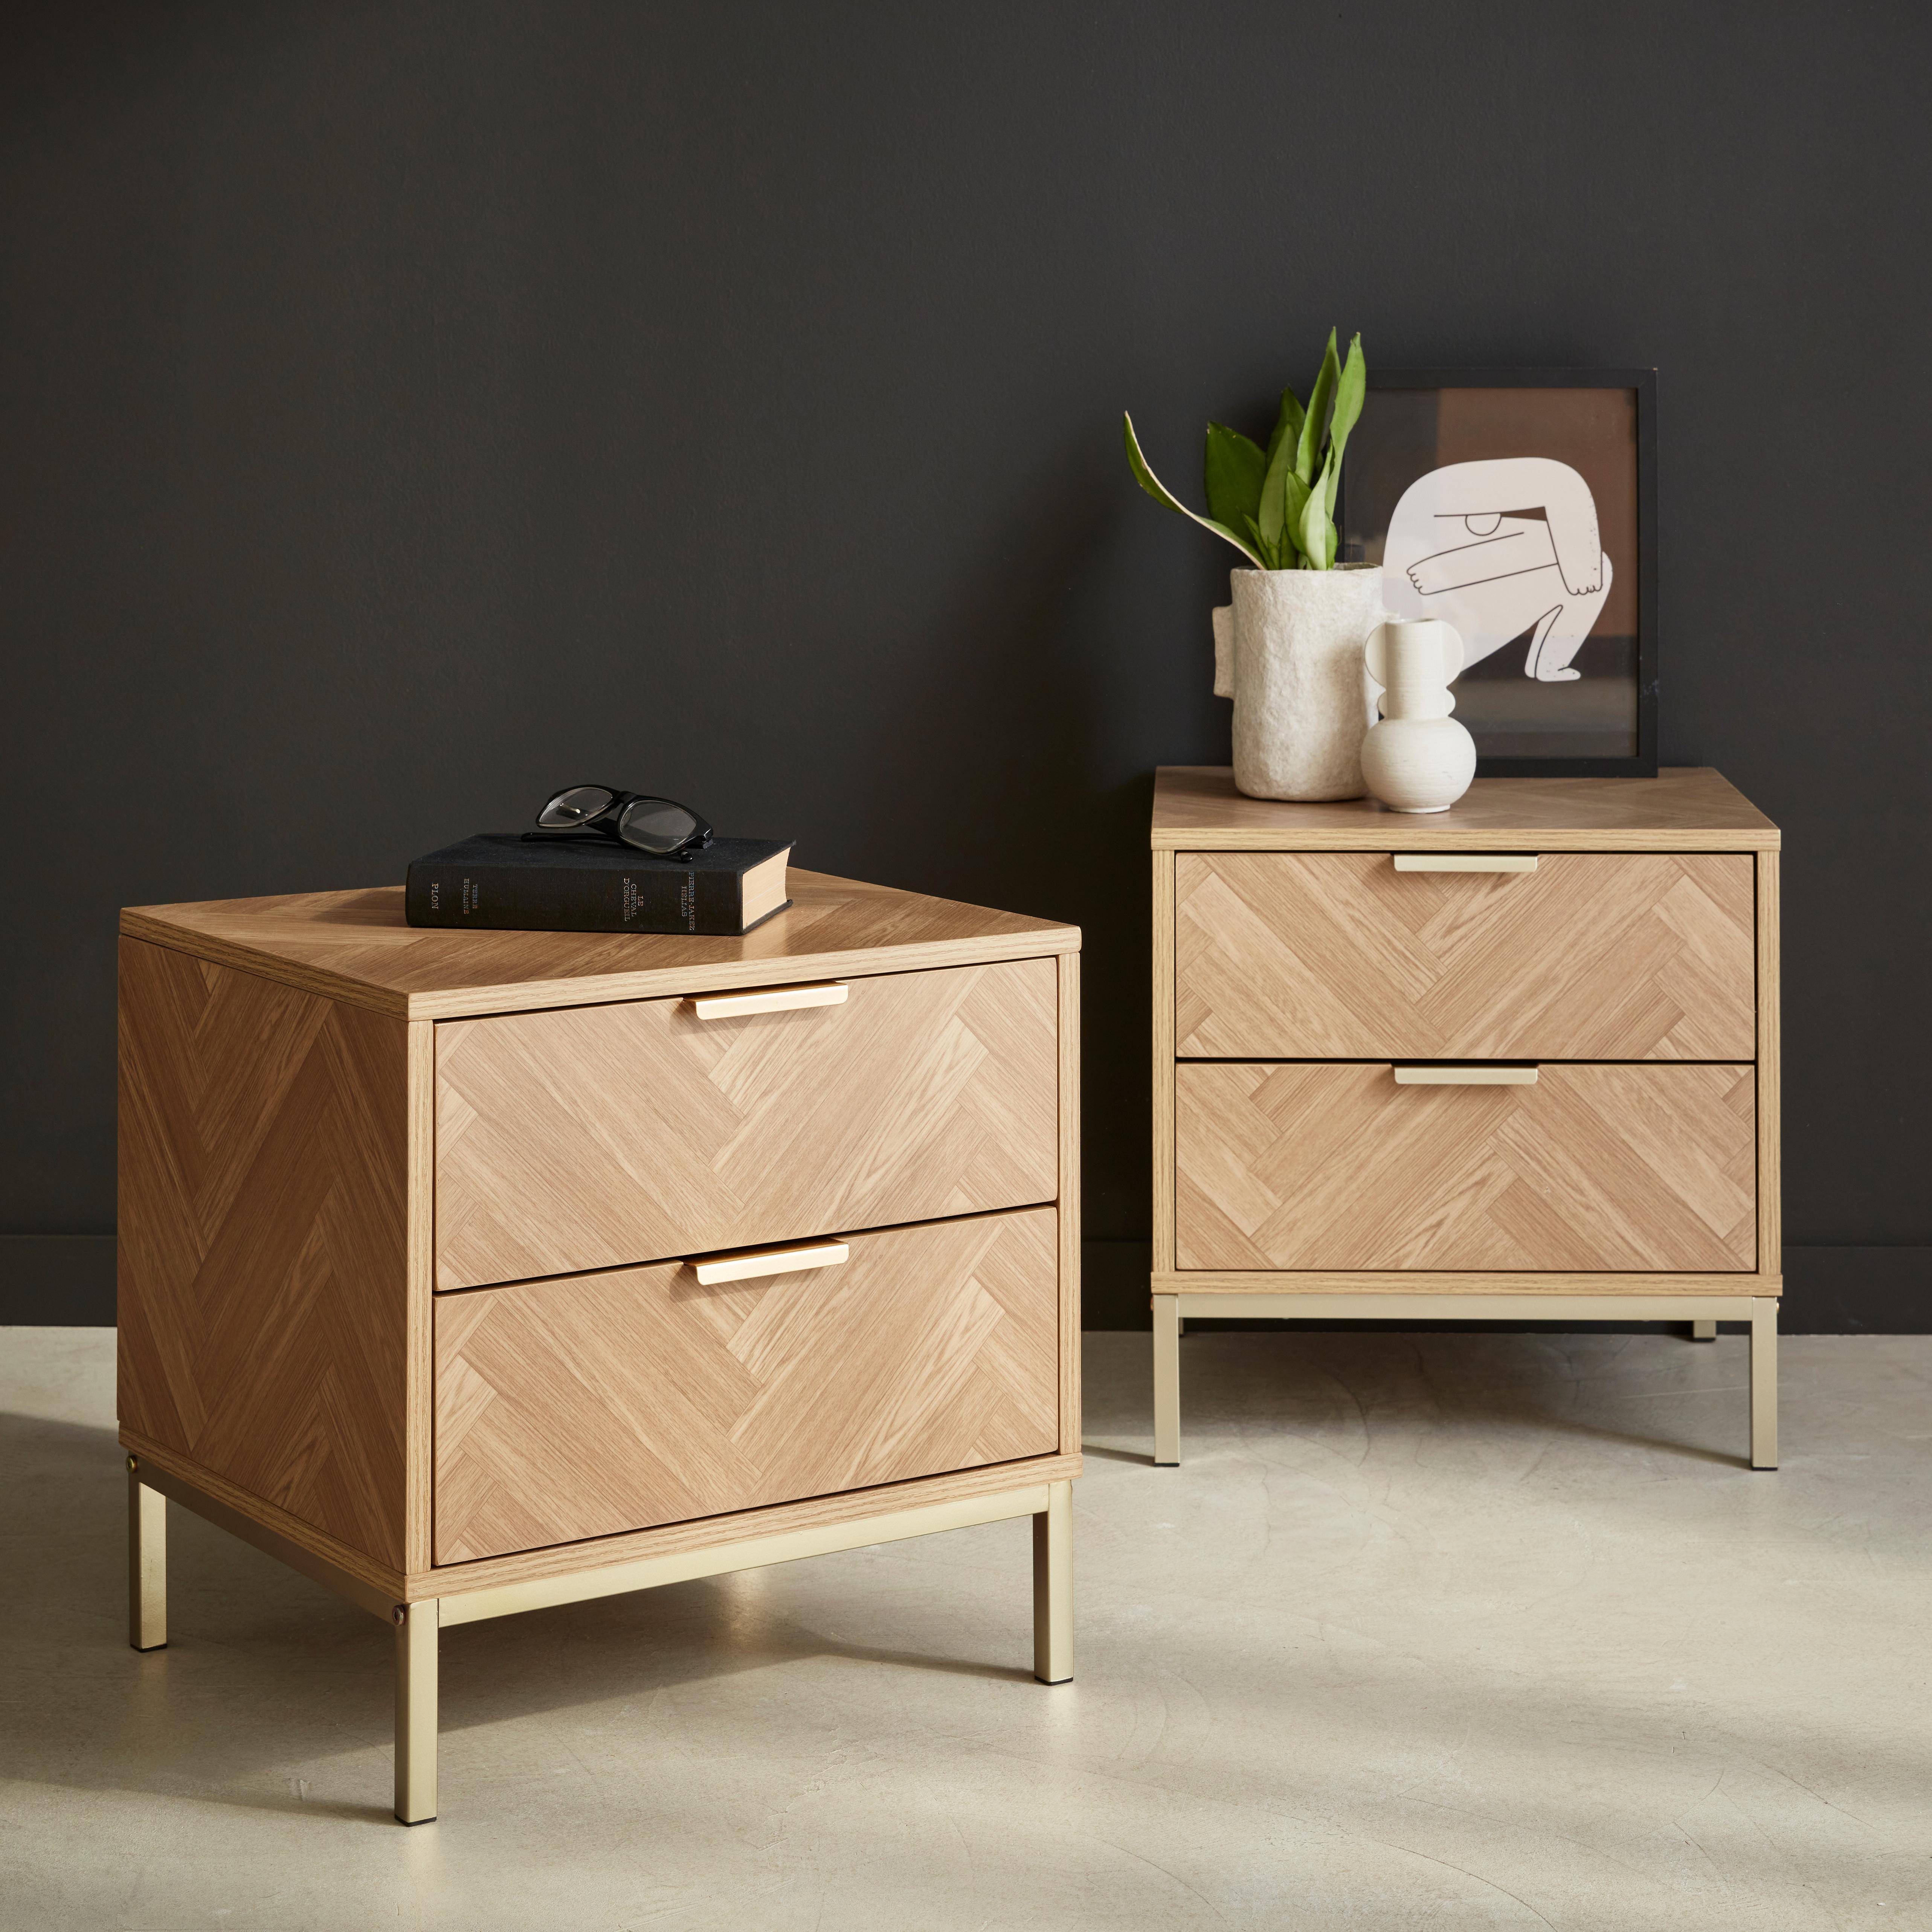 Pair of  contemporary Herringbone bedside table with 2 drawers Photo1